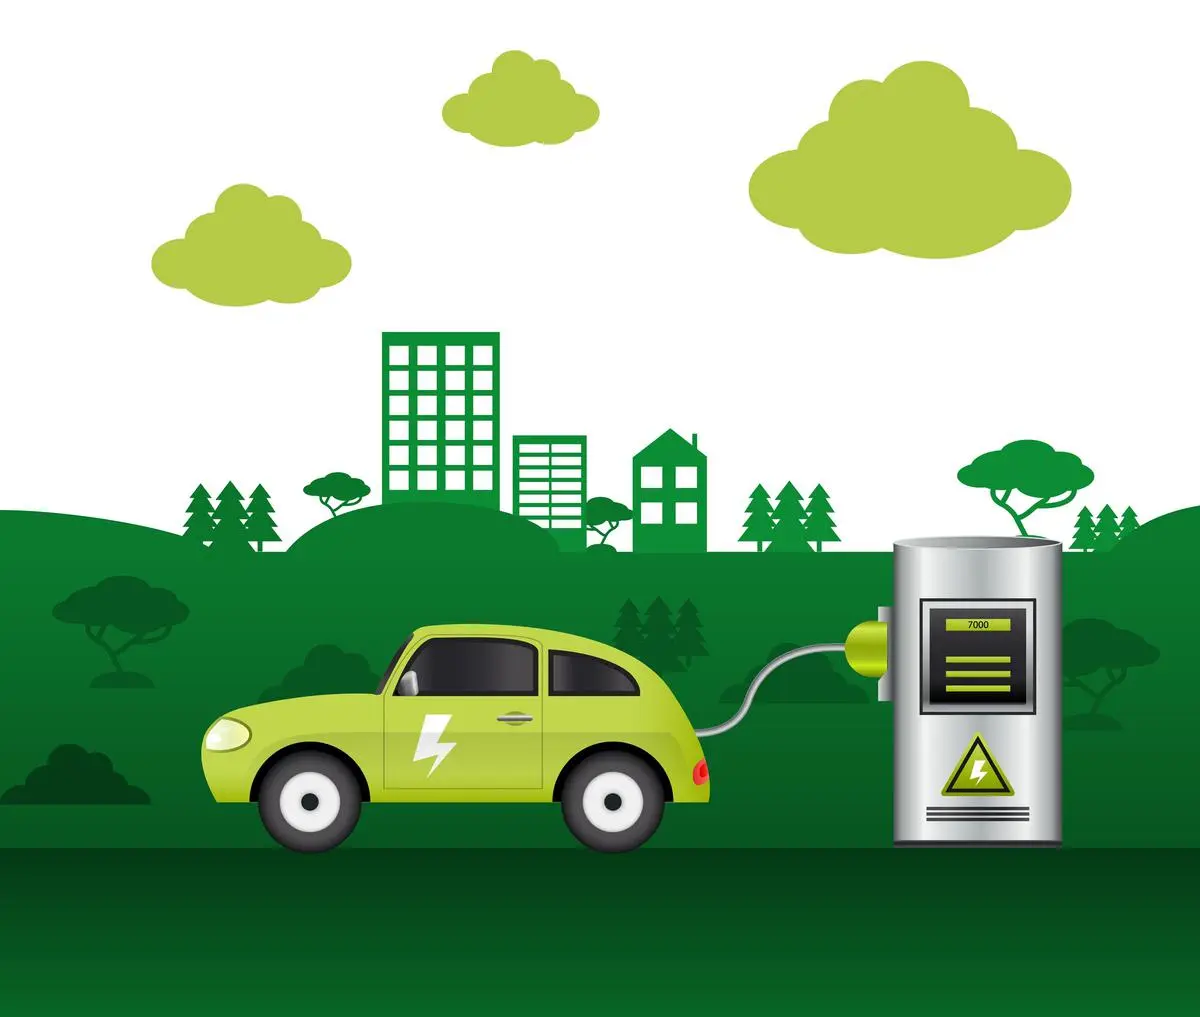 Electric-vehicles-as-types-of-green-vehicles